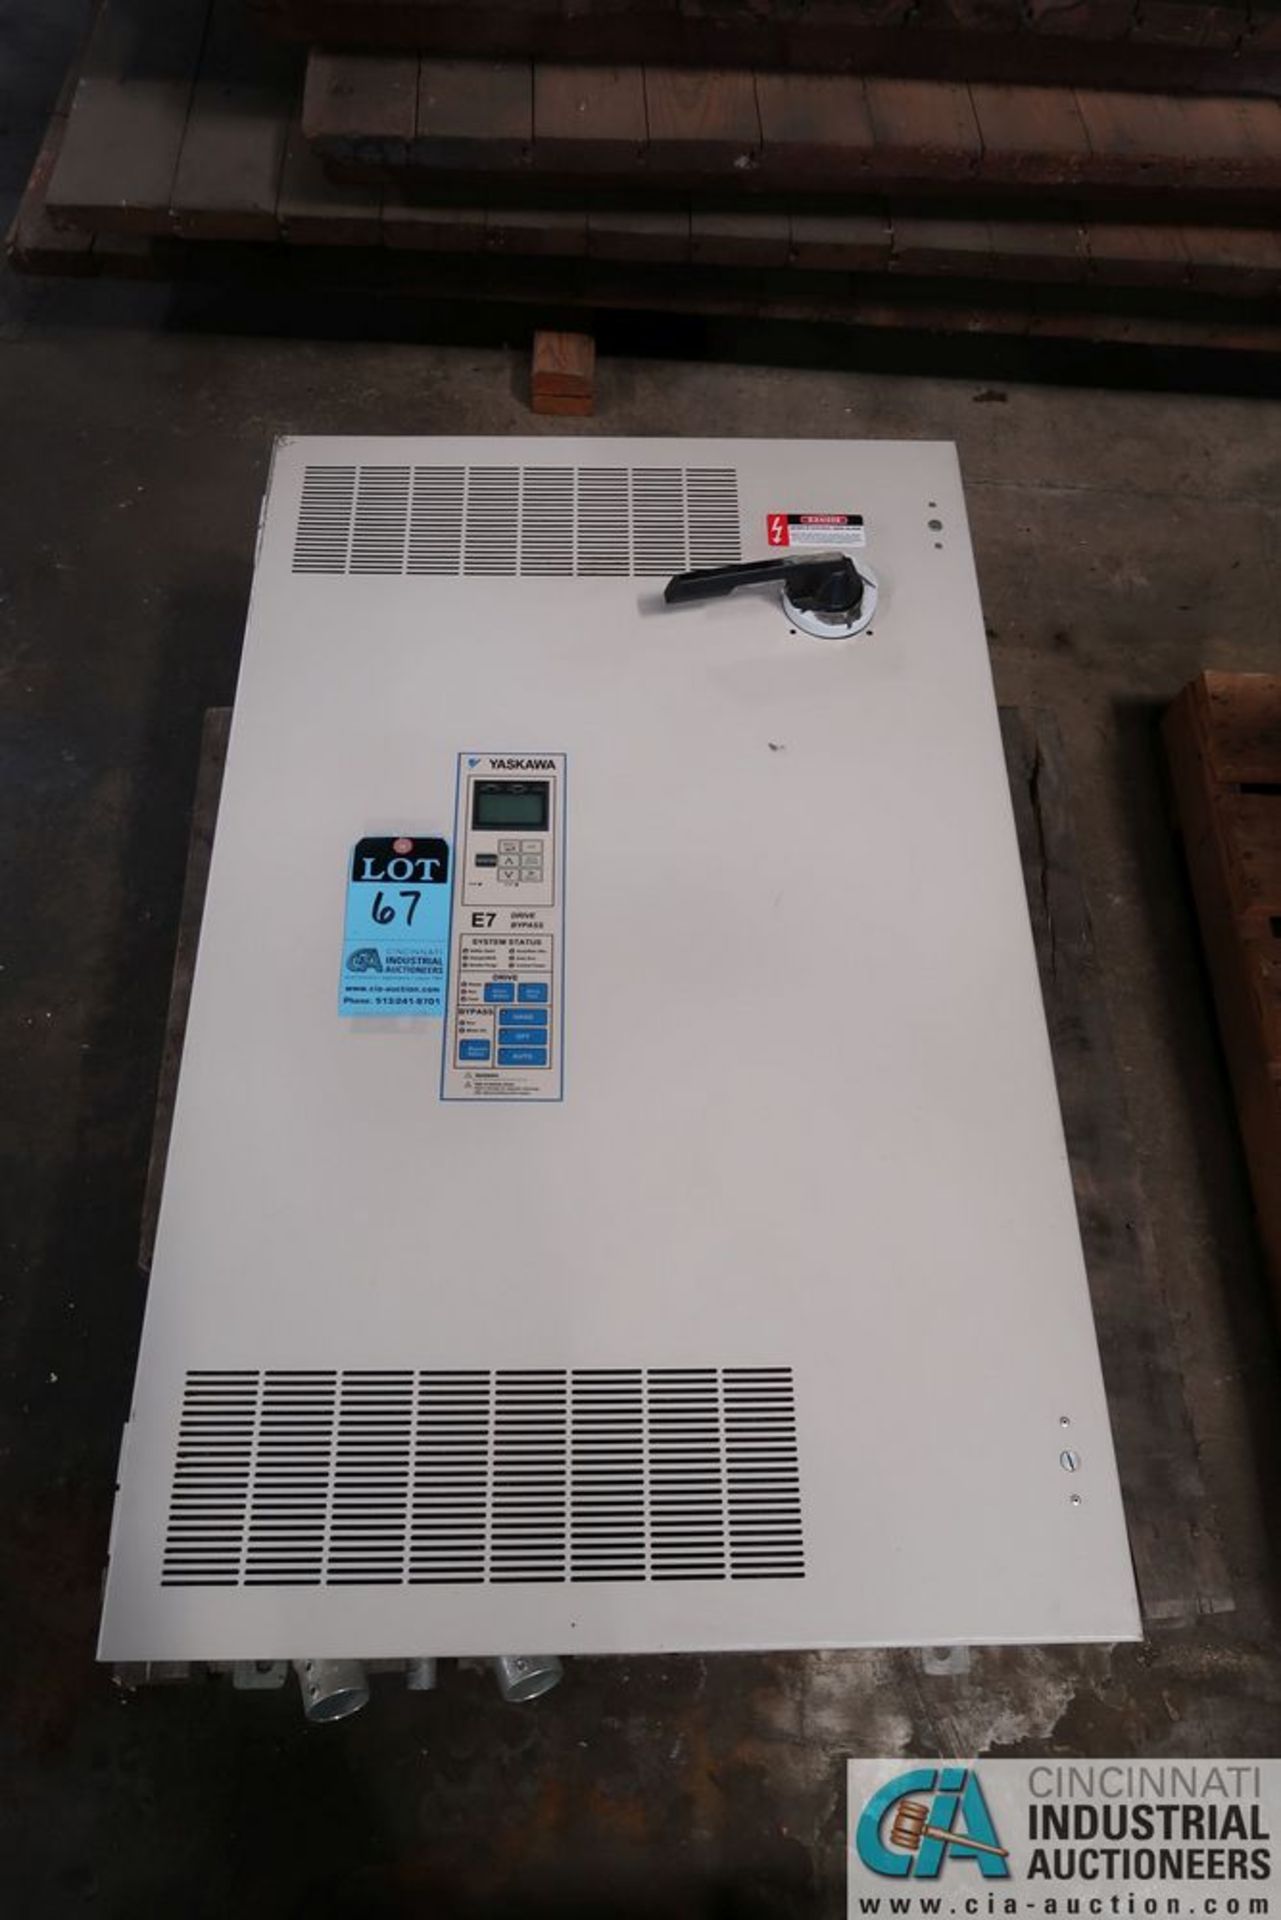 YASKAWA MODEL E7BVB077YL VARIABLE SPEED DRIVE/BYPASS PULSE WIDTH MODULATED DRIVE SYSTEM FOR 3 PHASE